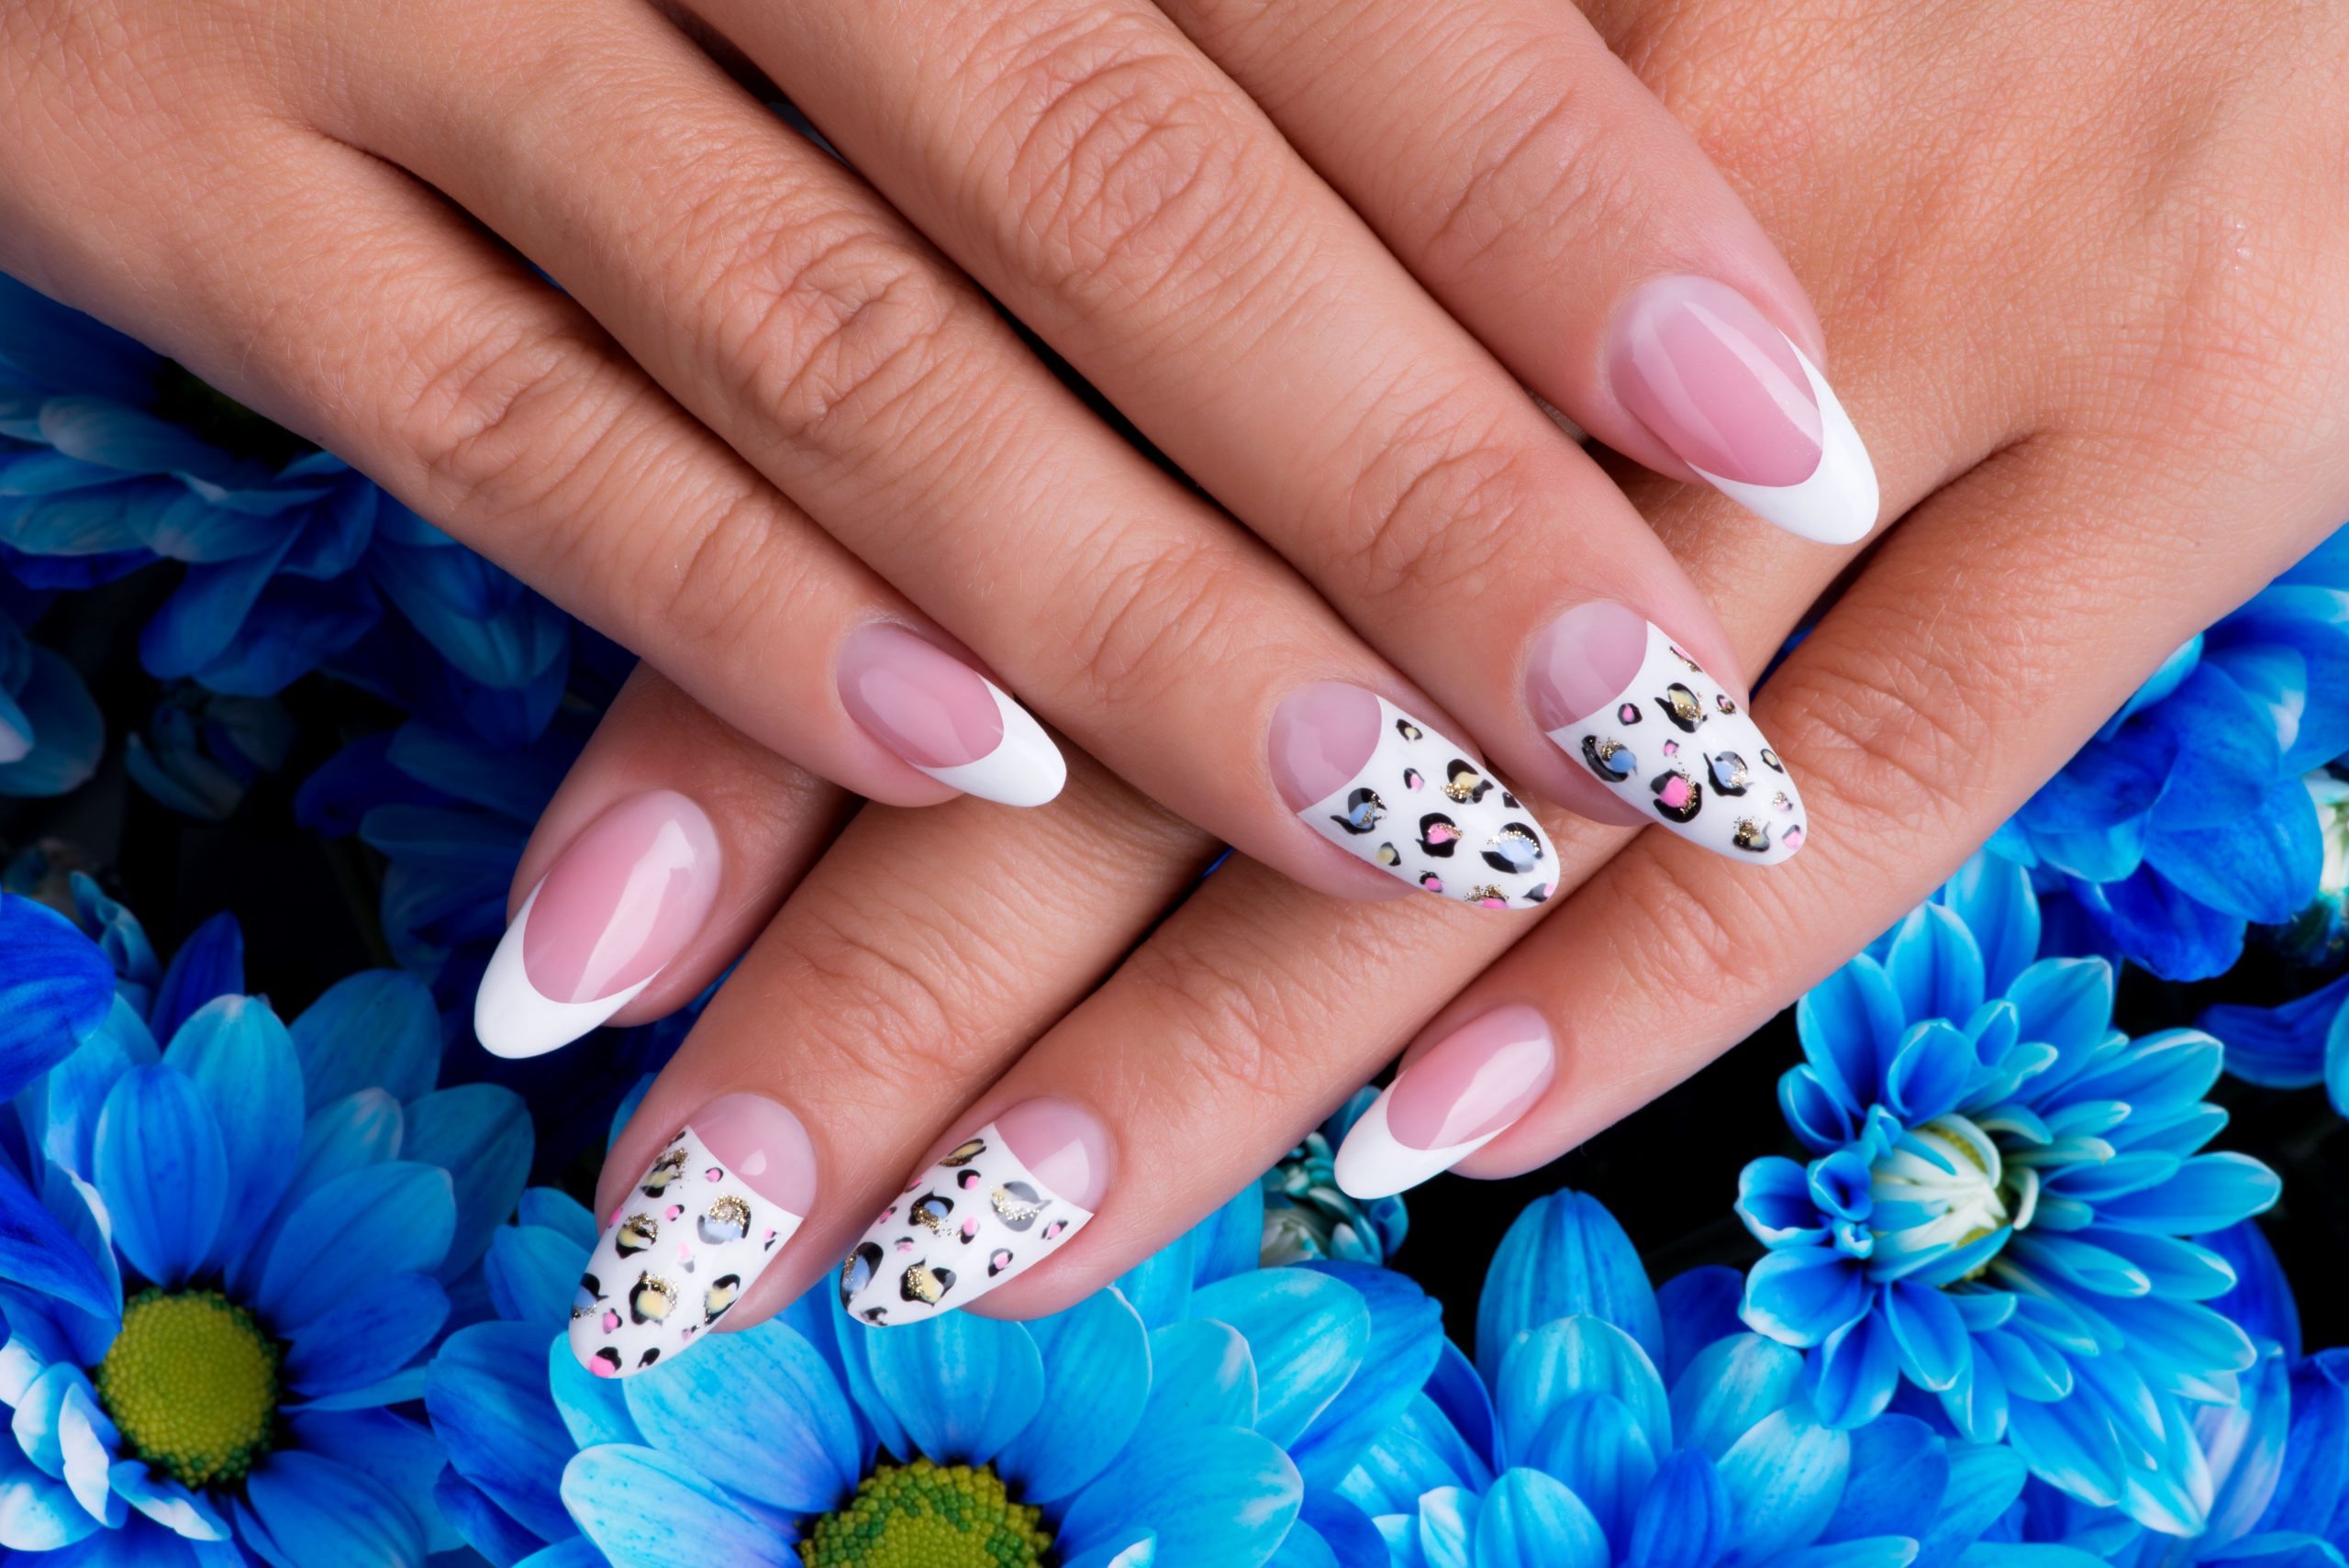 2. Nail Artistry - wide 1